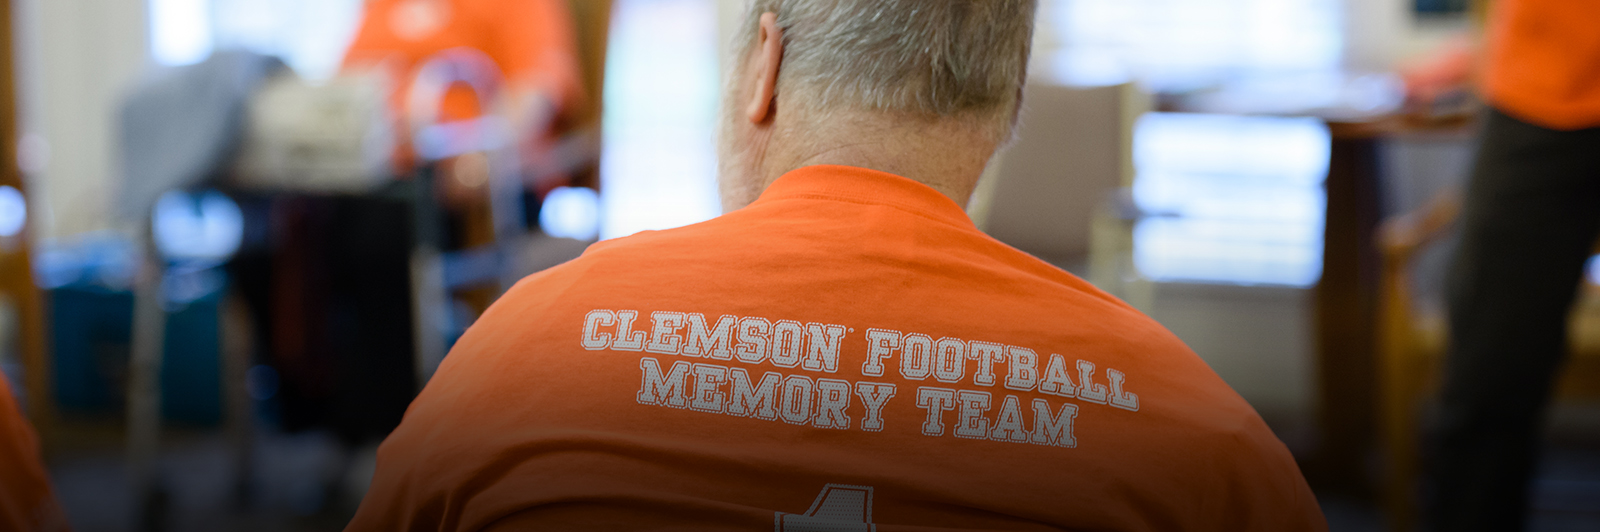 A man's back is shown, with the words "Clemson football memory team" written across the back of his orange shirt.